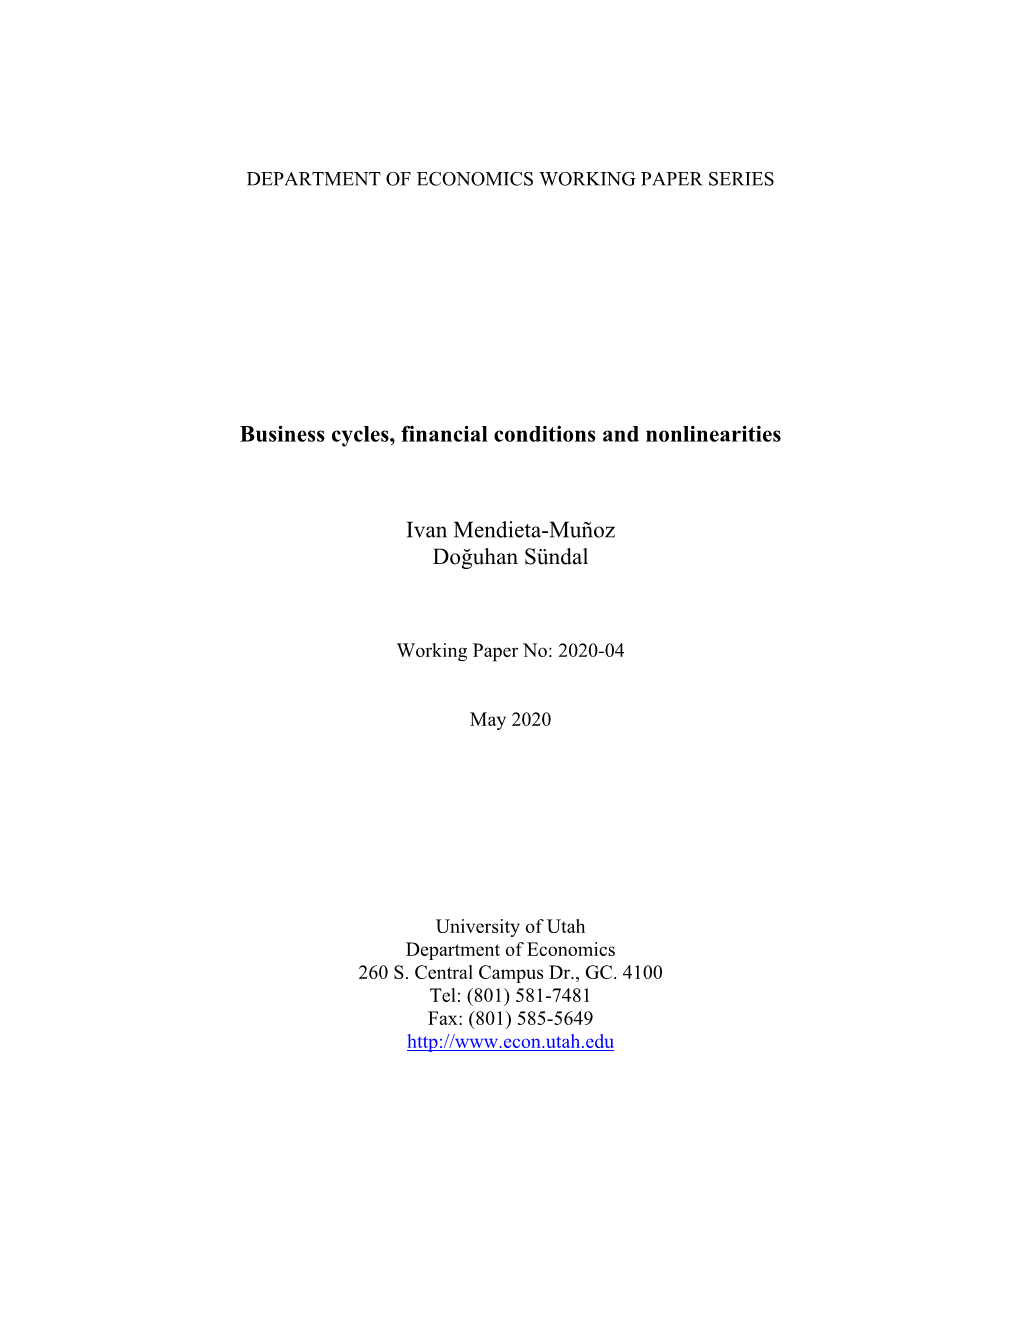 Business Cycles, Financial Conditions and Nonlinearities Ivan Mendieta